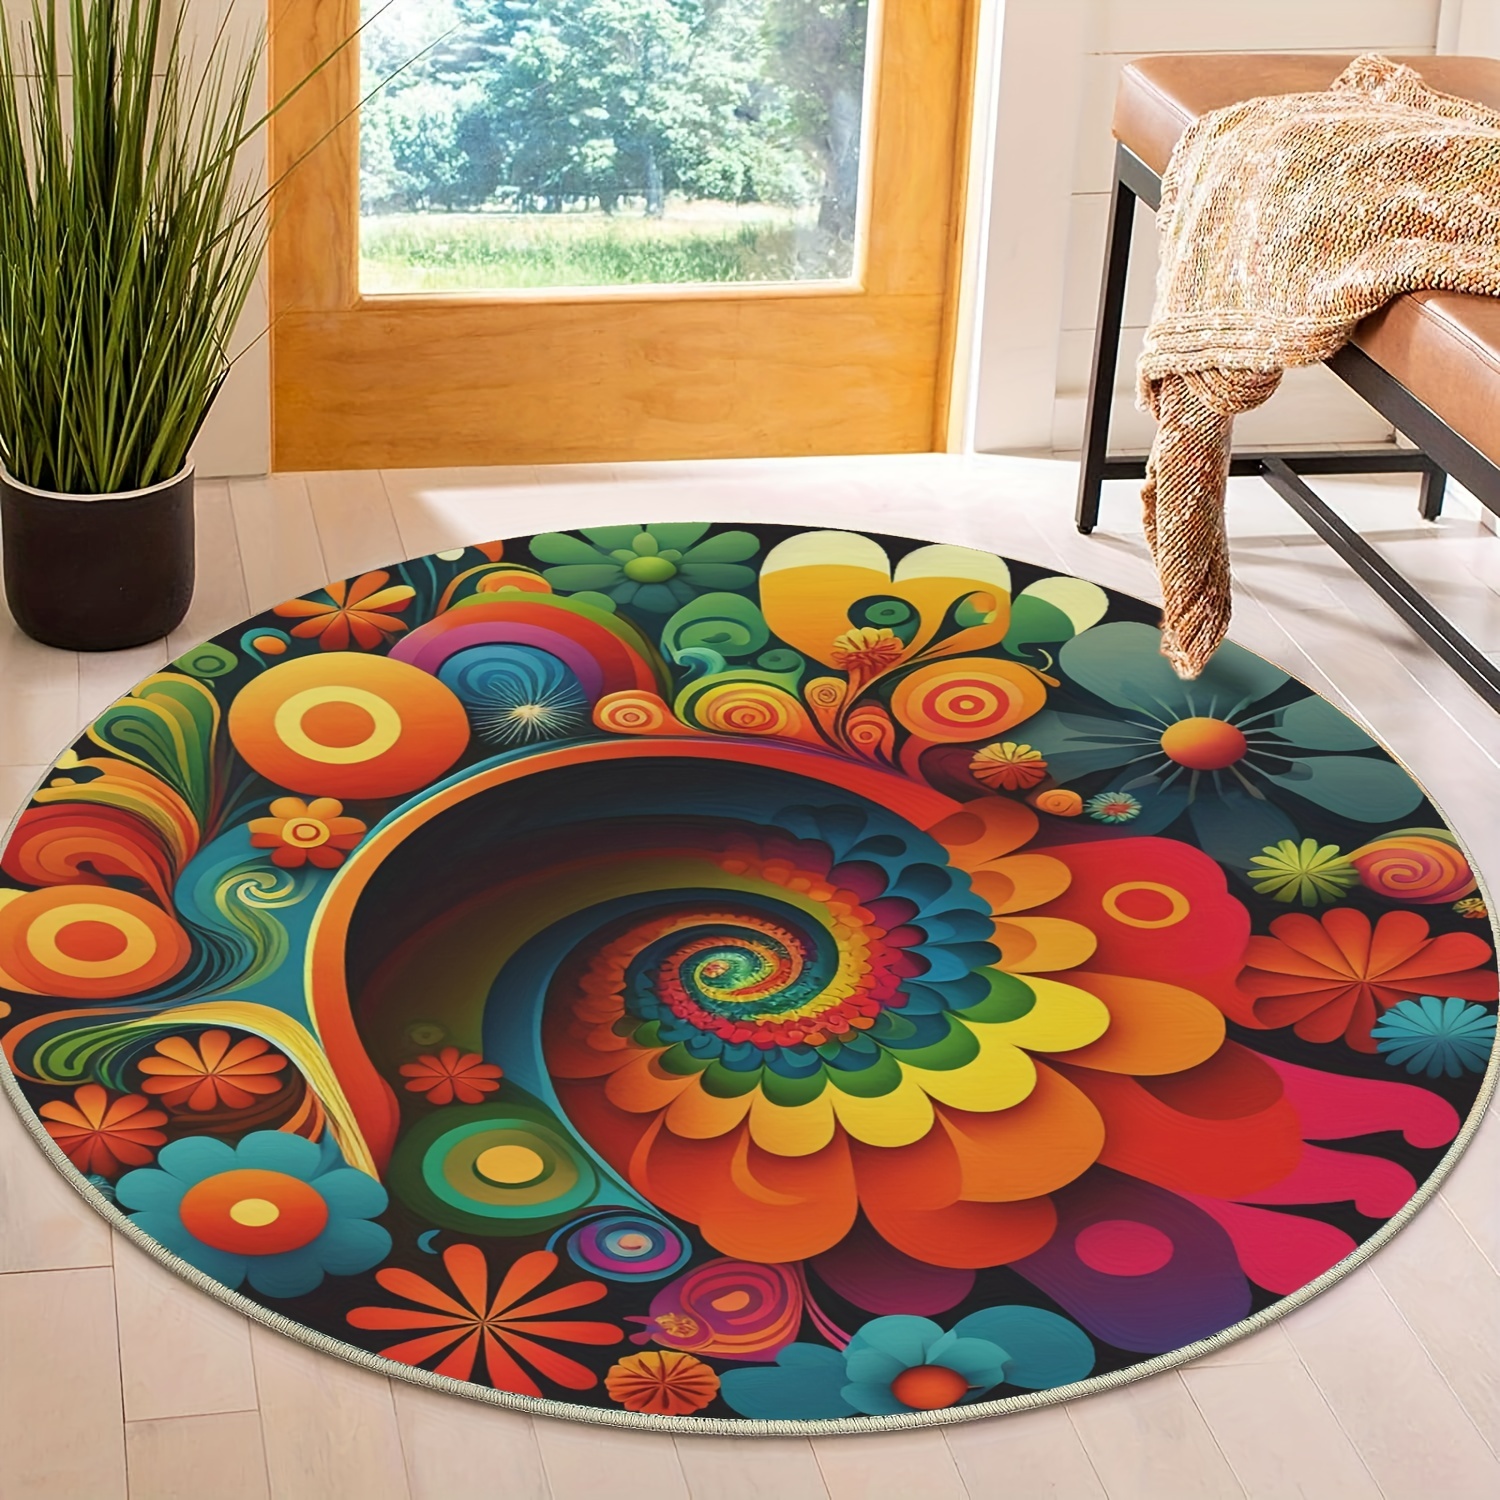 

Area Rug Bright Colorful Ornamental Trendy Round Area Rugs Soft Chic Circles Carpet Backing-non-slip & Durable, Soft Carpet For Bedroom Kitchen Dining Room Floor Home Office Decor